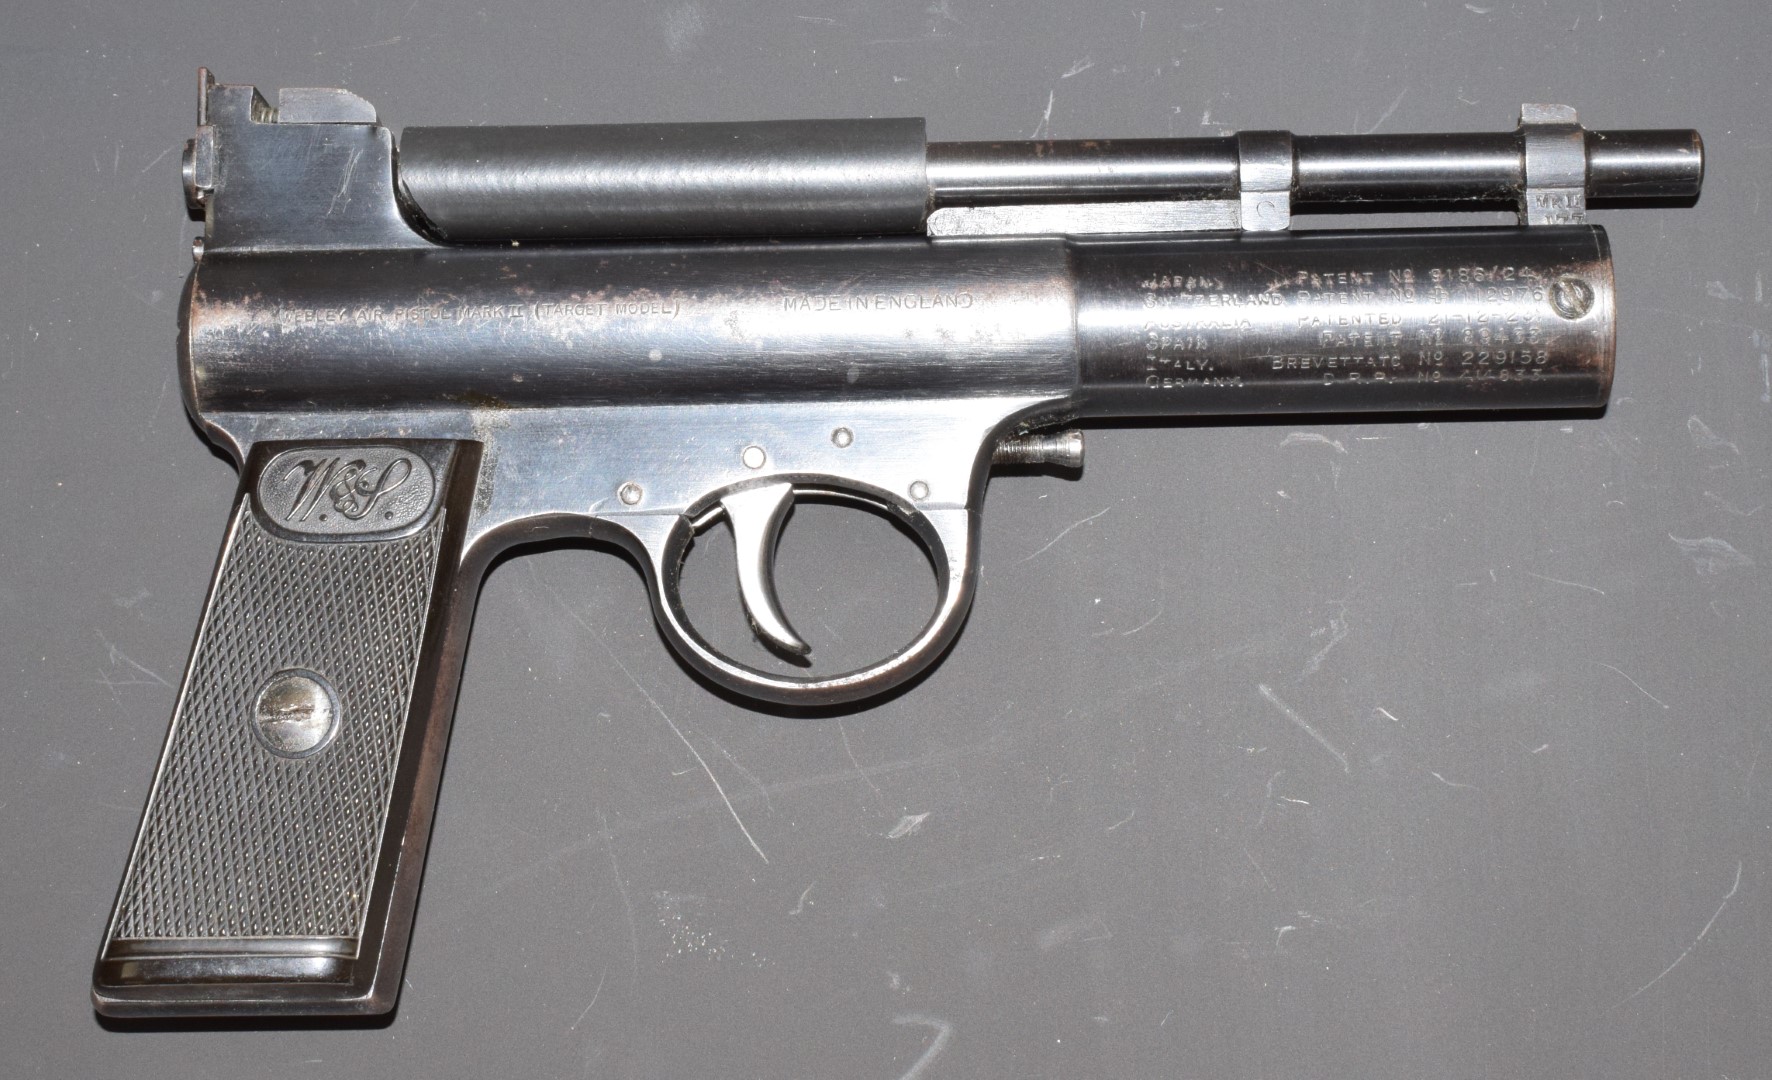 Webley Mark II .177 air pistol with monogrammed and chequered grips, in original box with - Image 2 of 3